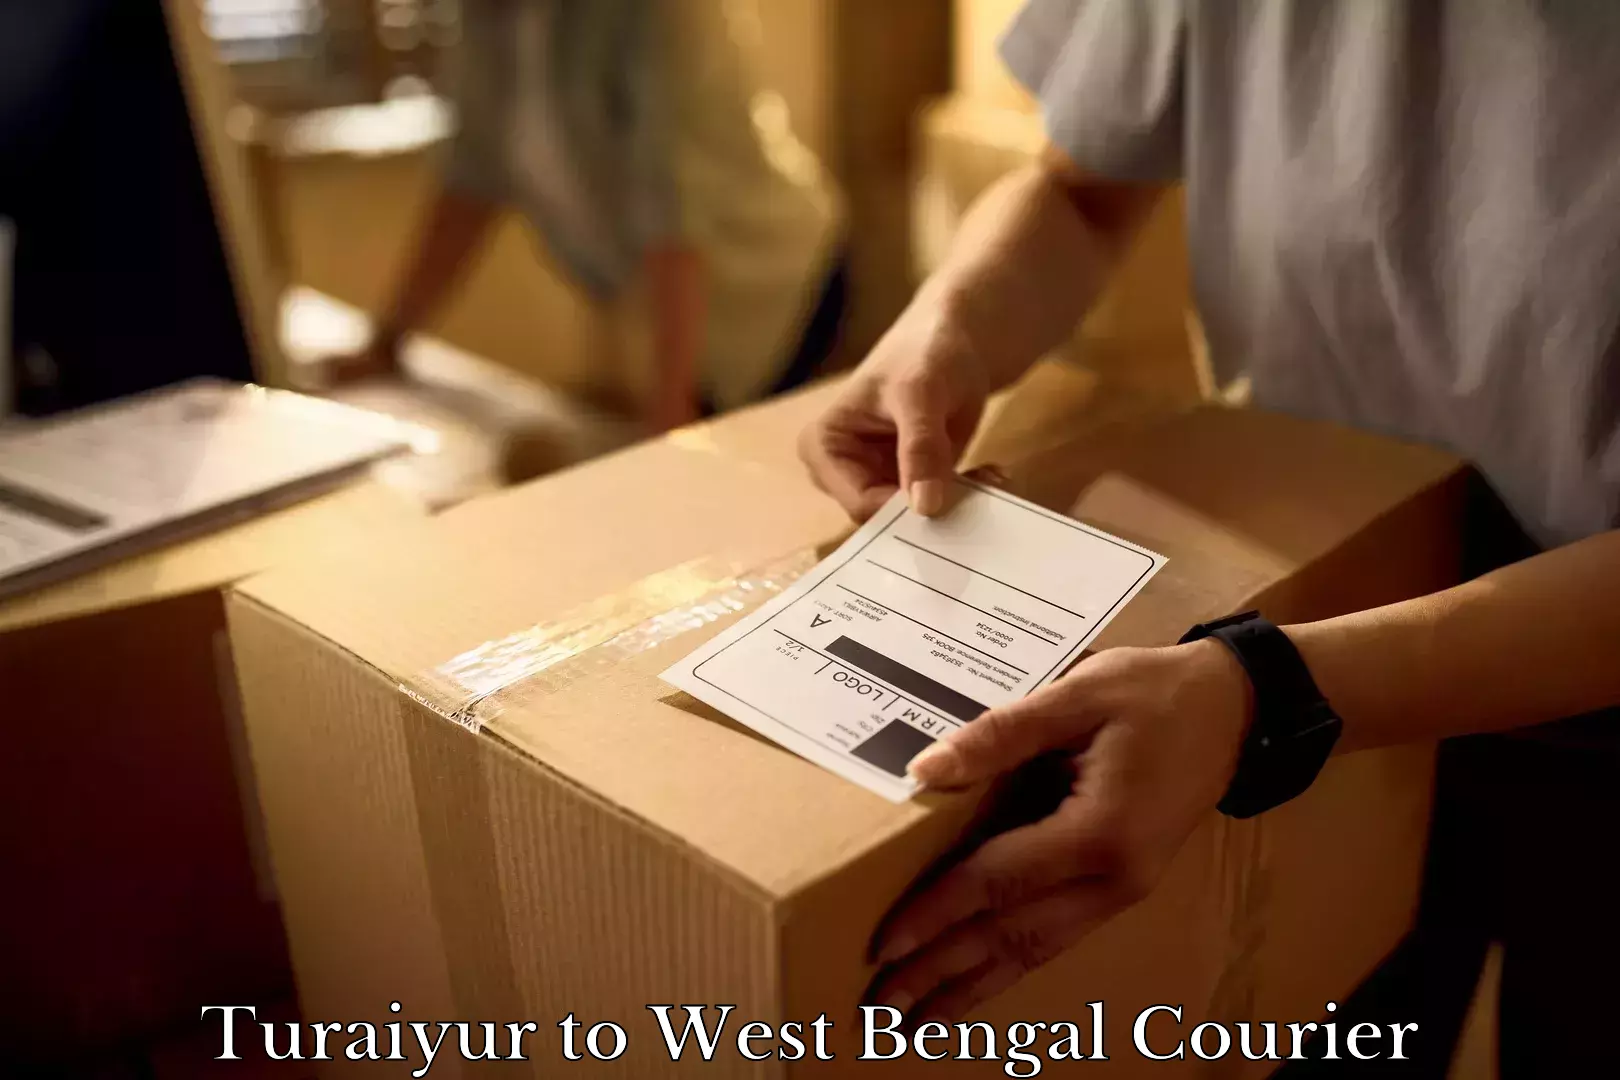 Furniture transport specialists in Turaiyur to West Bengal